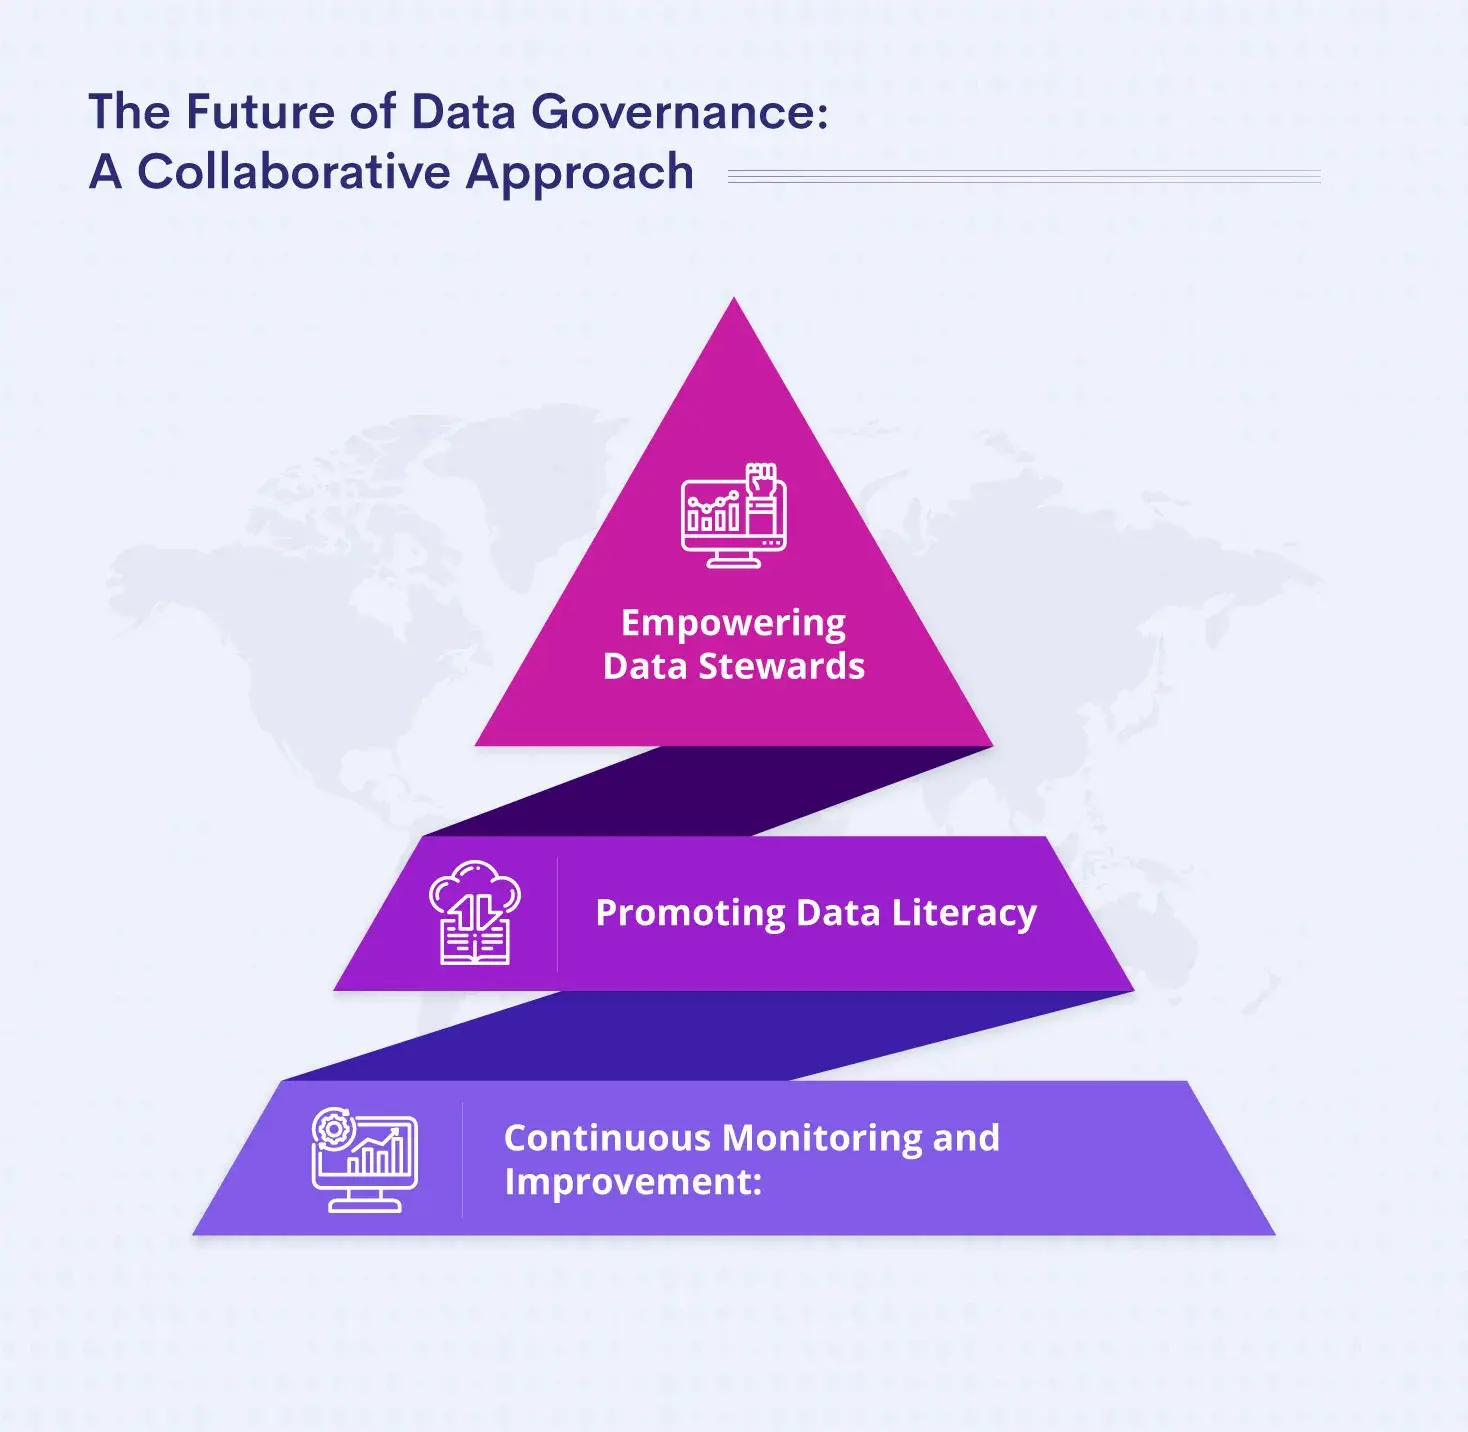 The Future of Data Governance